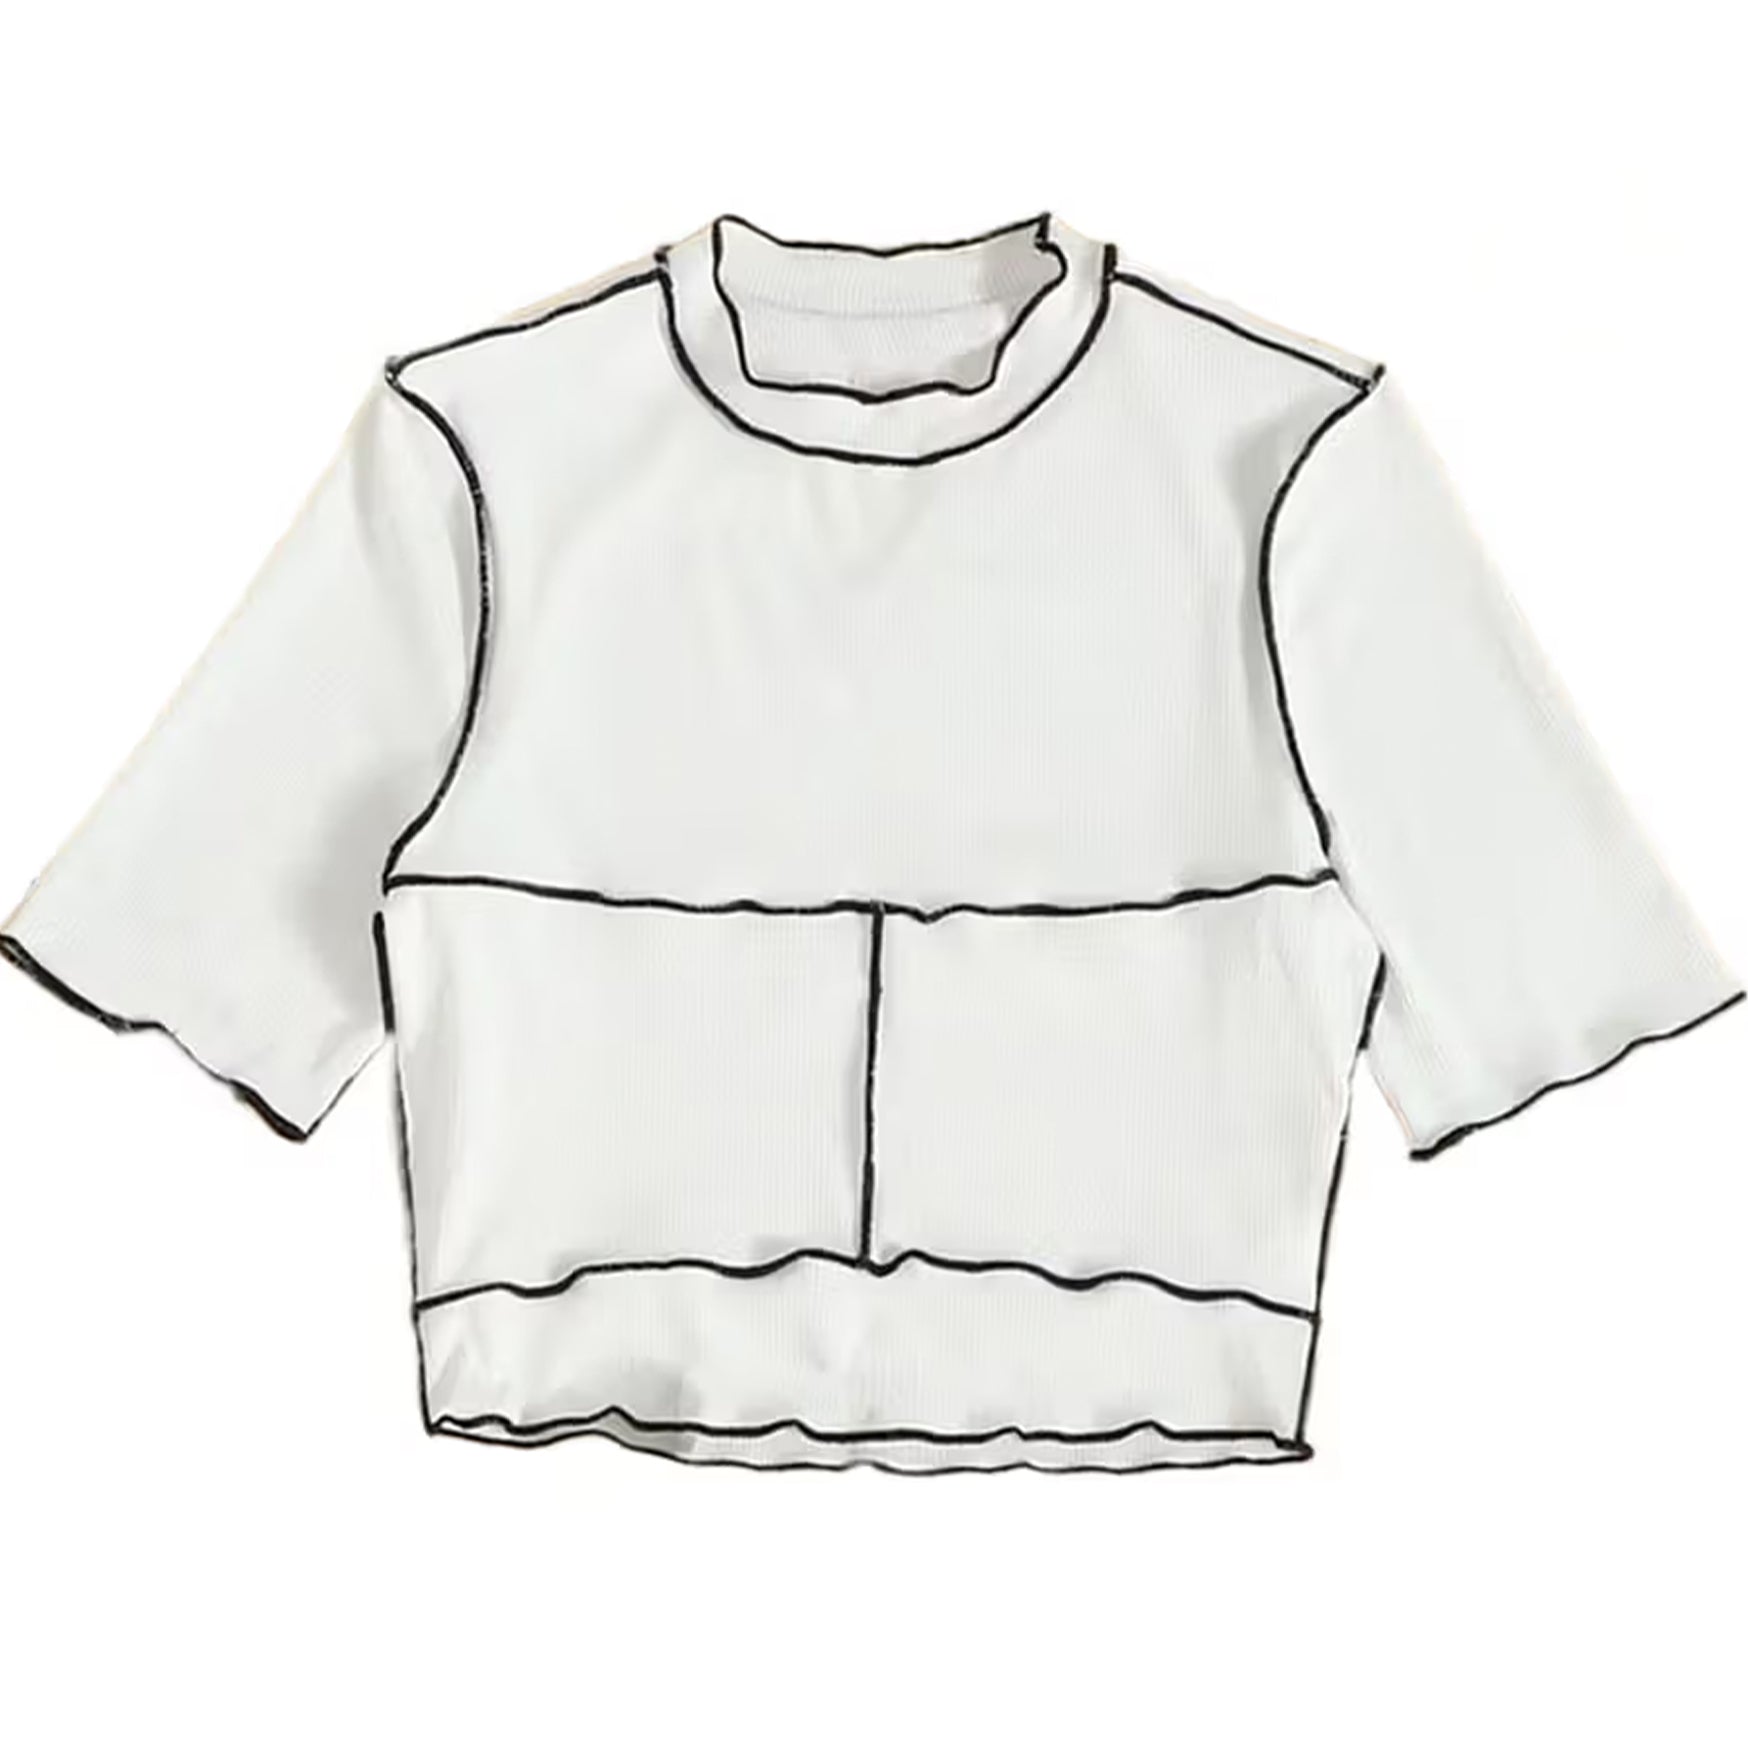 Khhalisi High Neck Croptop for Womens (S)